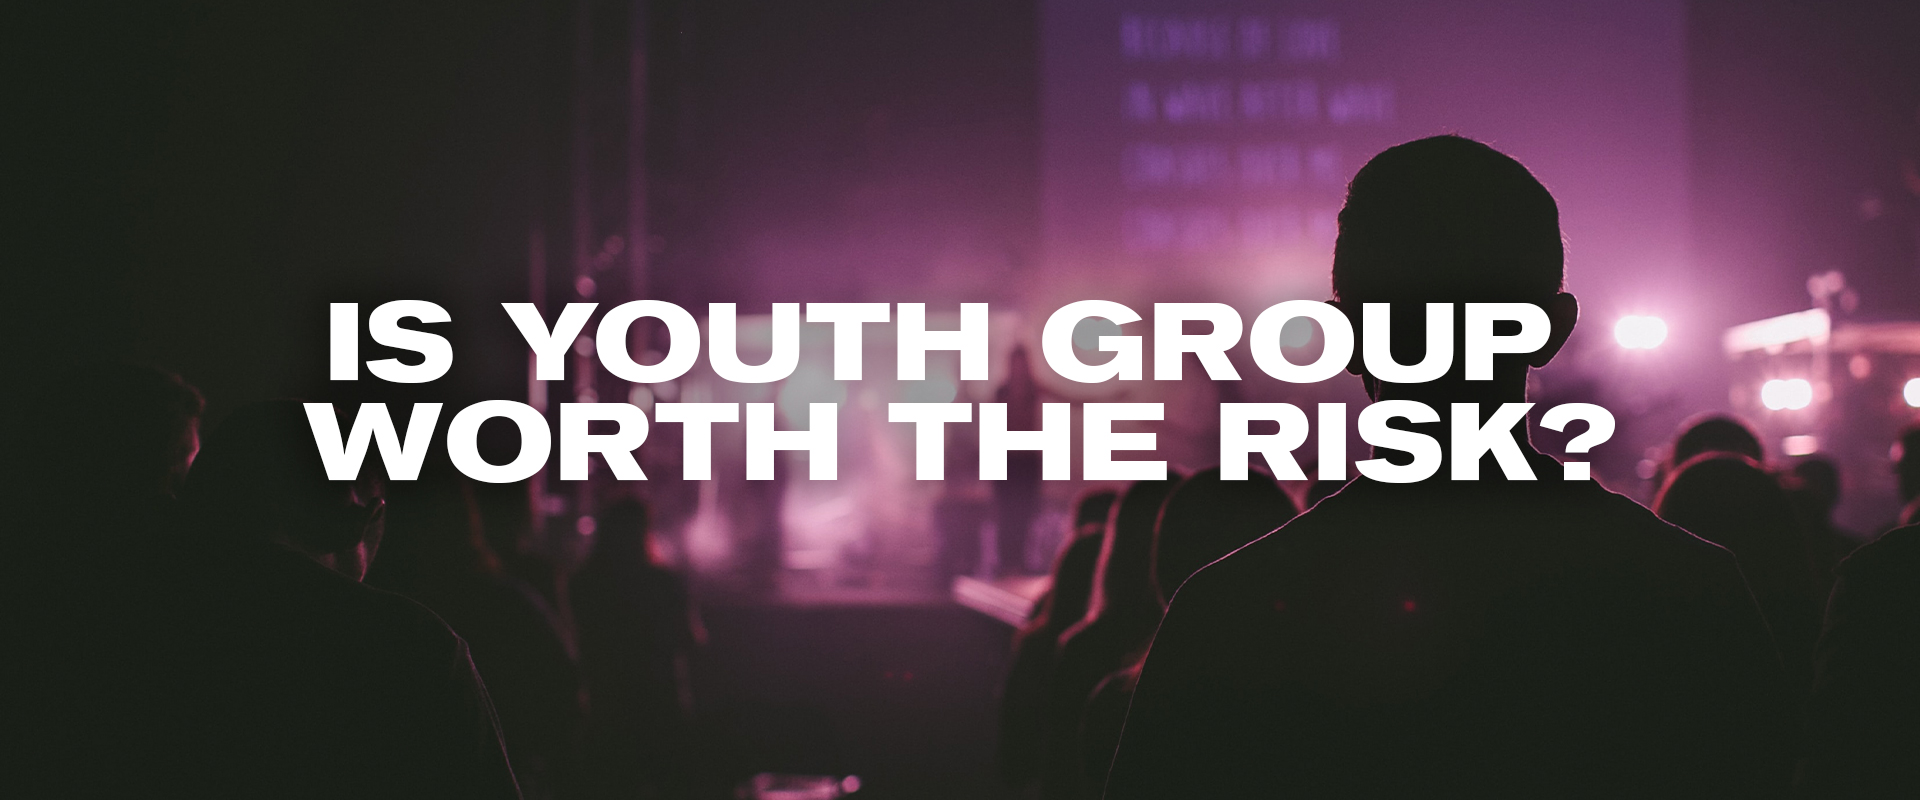 Is Youth Group Worth The Risk?